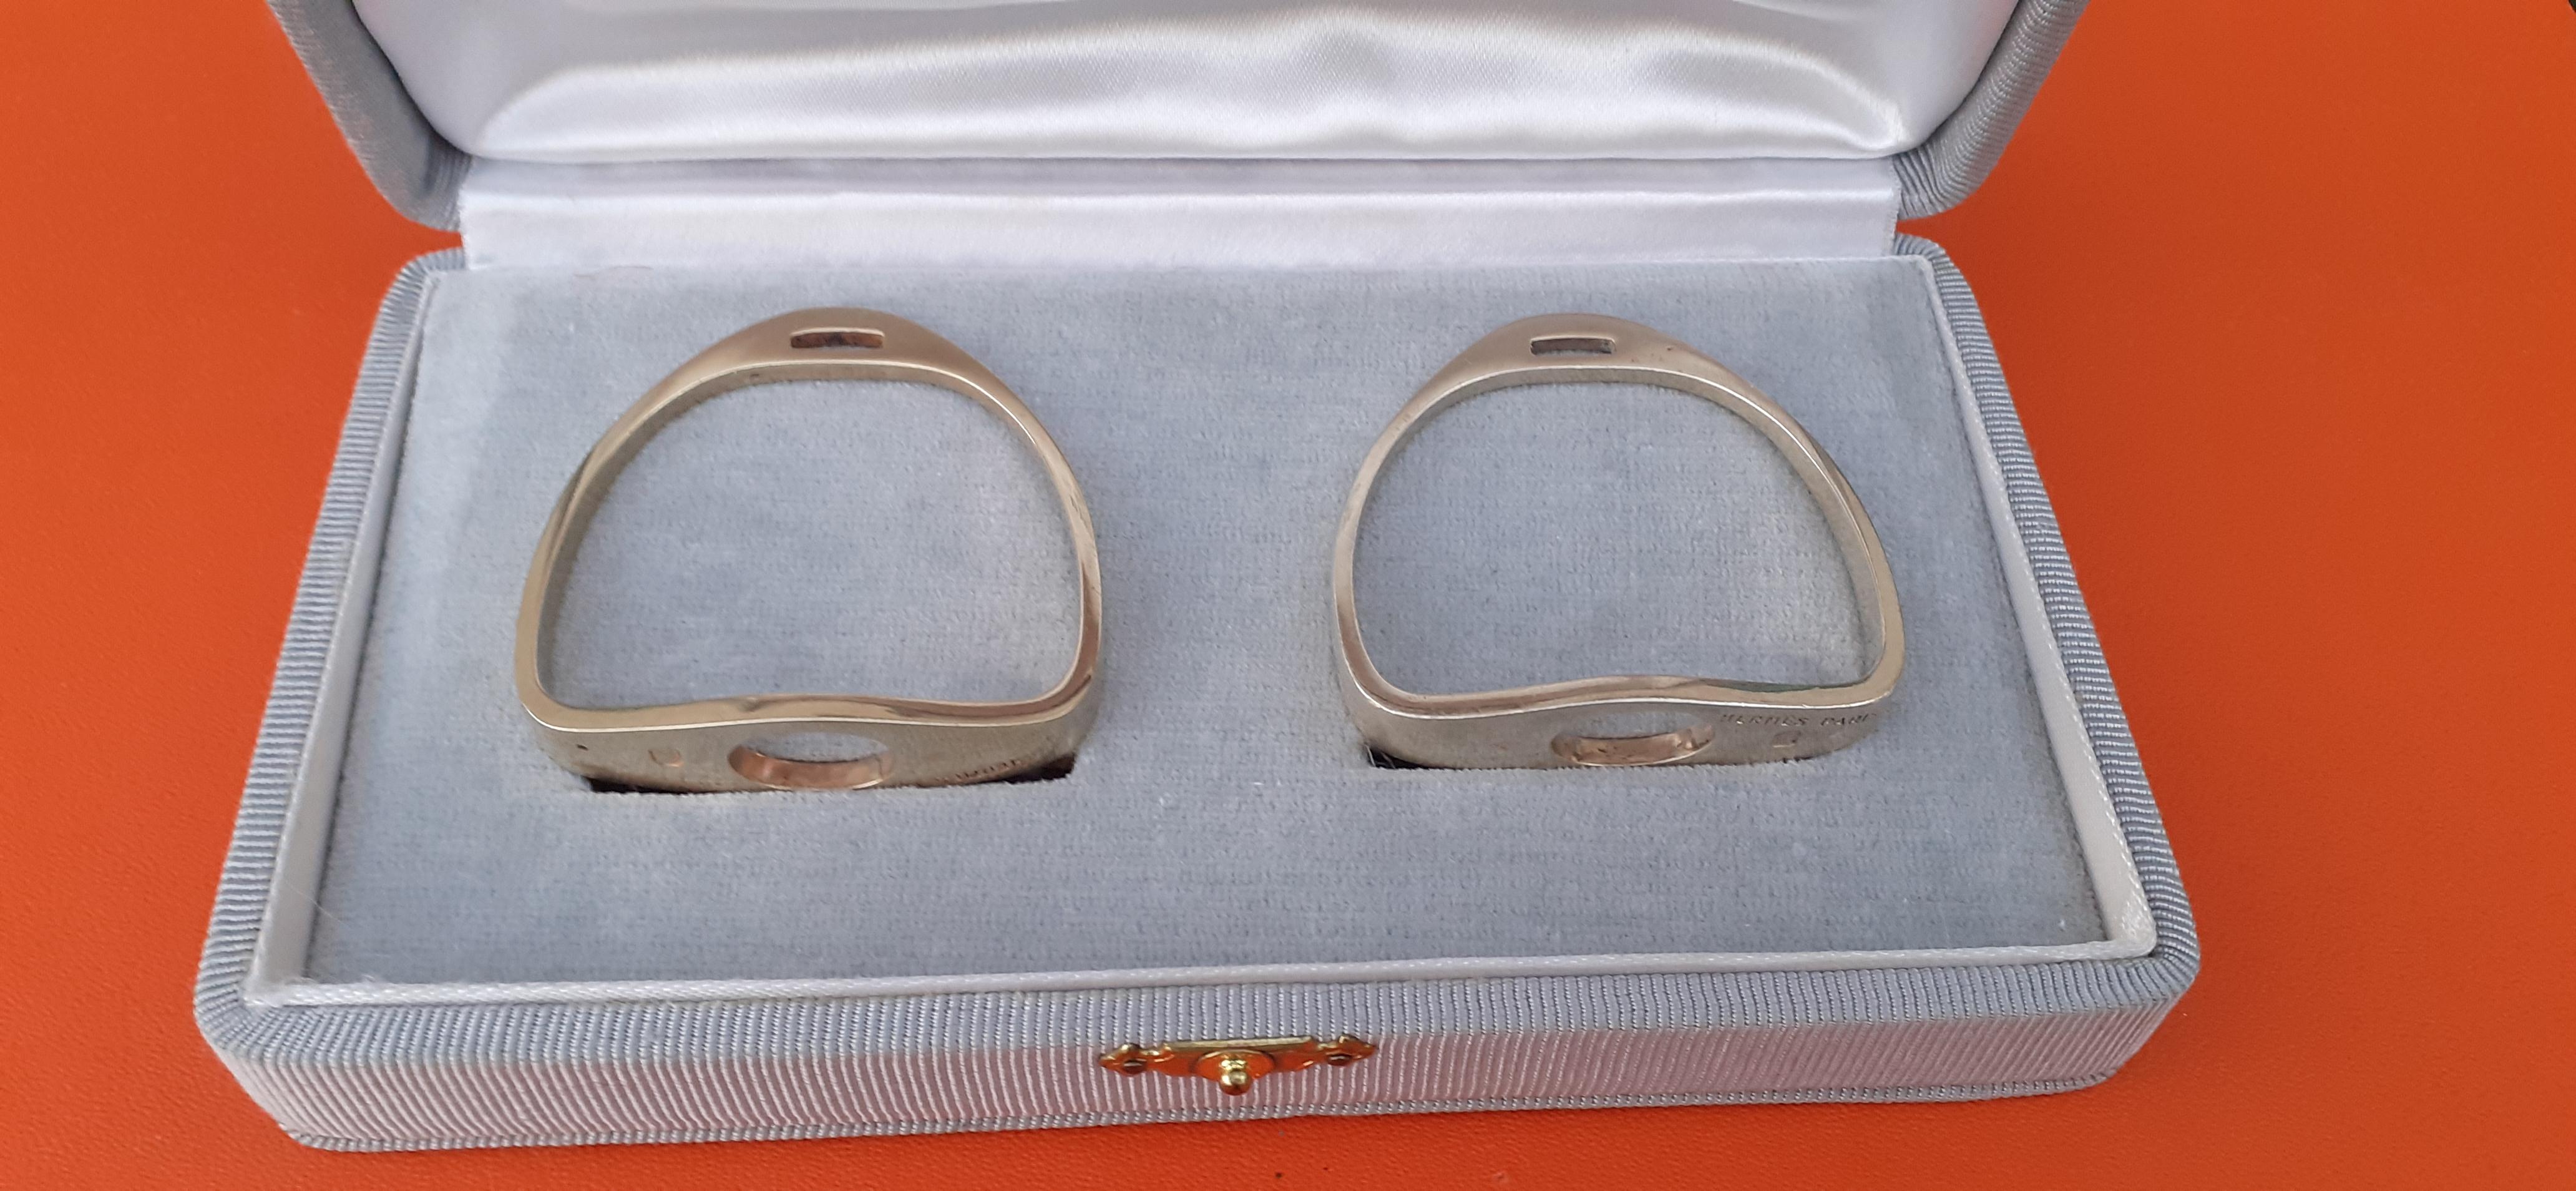 Exceptional Hermès Set of 2 Napkin Rings Stirrups Shaped in Silver-Gilt Texas For Sale 1